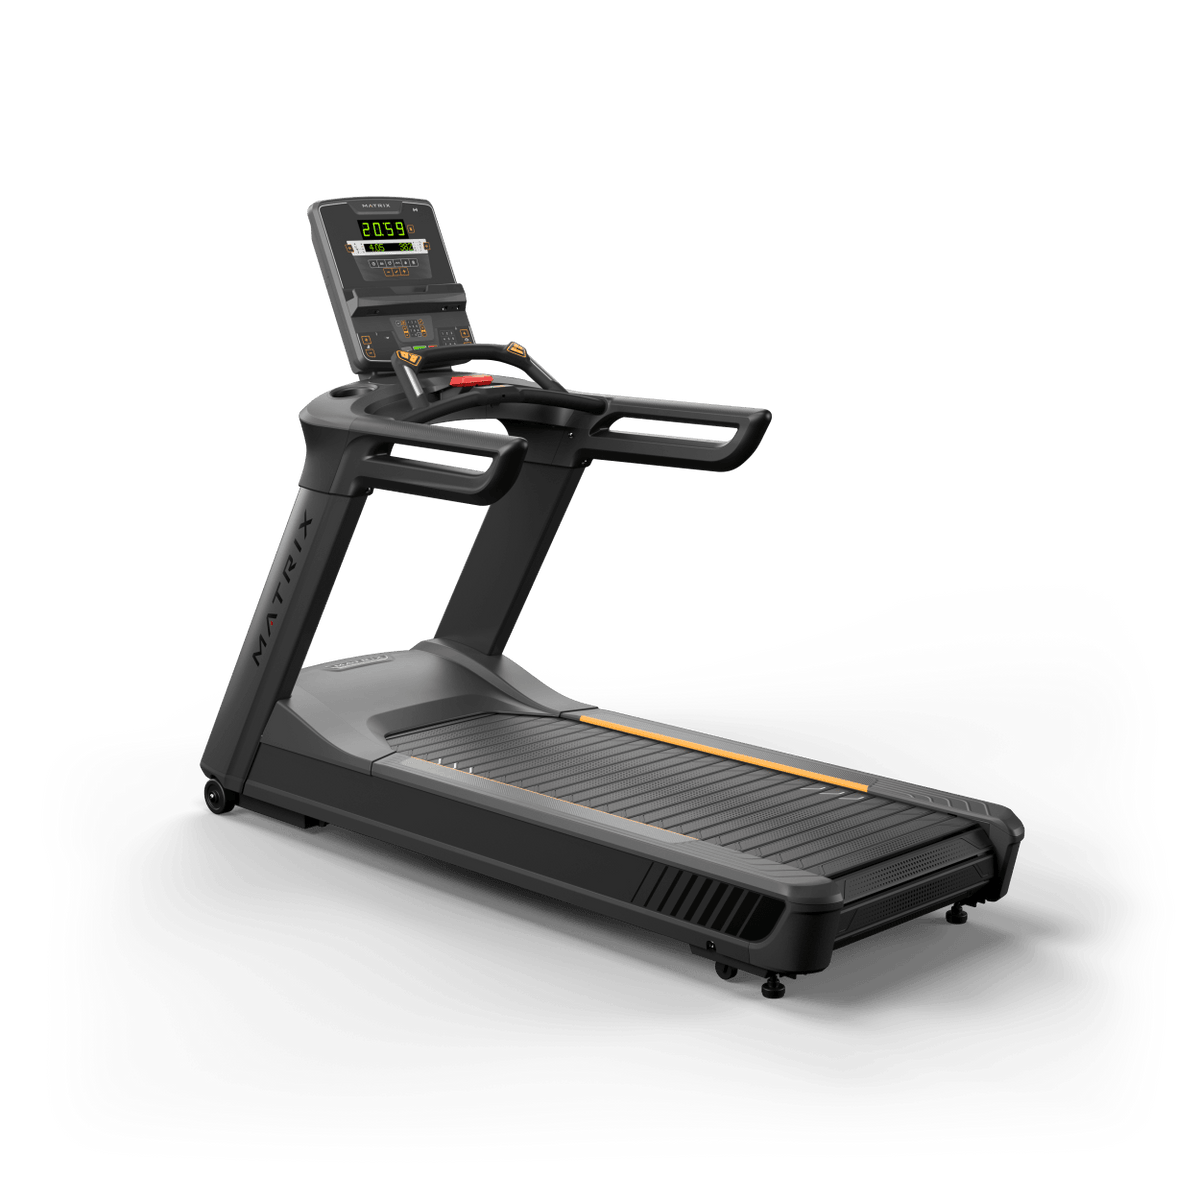 Matrix Performance Plus Treadmill with LED Console full view | Fitness Experience